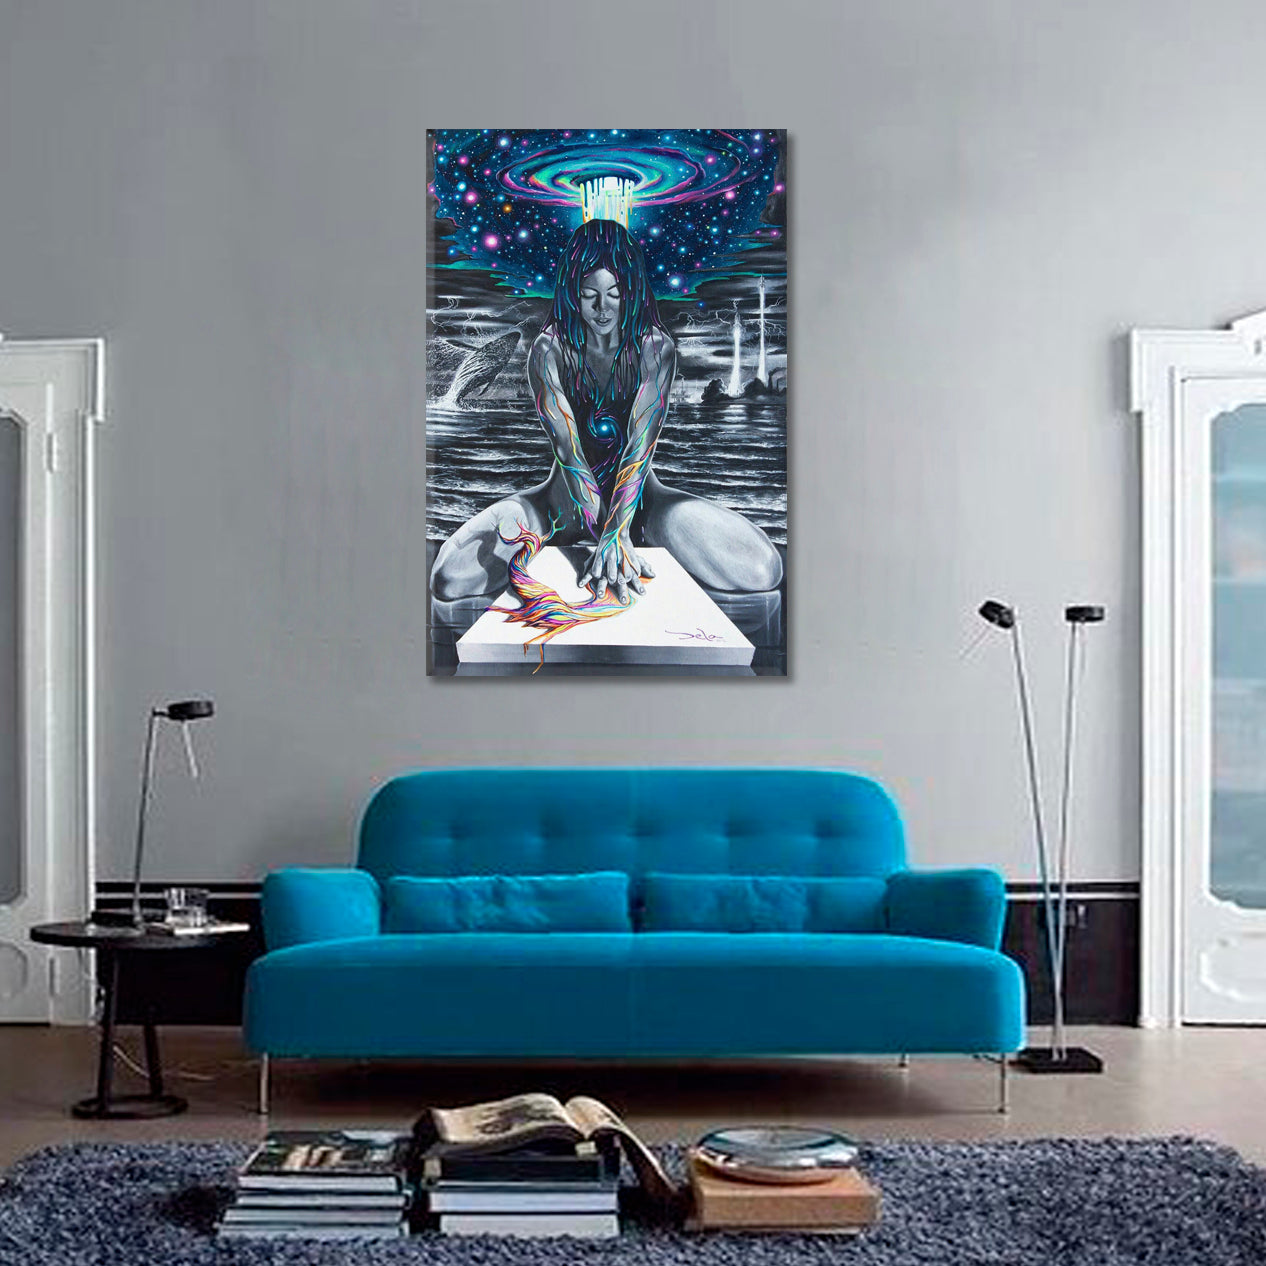 INSPIRED  Beautiful Woman And Nature Surreal Abstract Art - Vertical 1 panel Surreal Fantasy Large Art Print Décor Artesty 1 Panel 16"x24" 